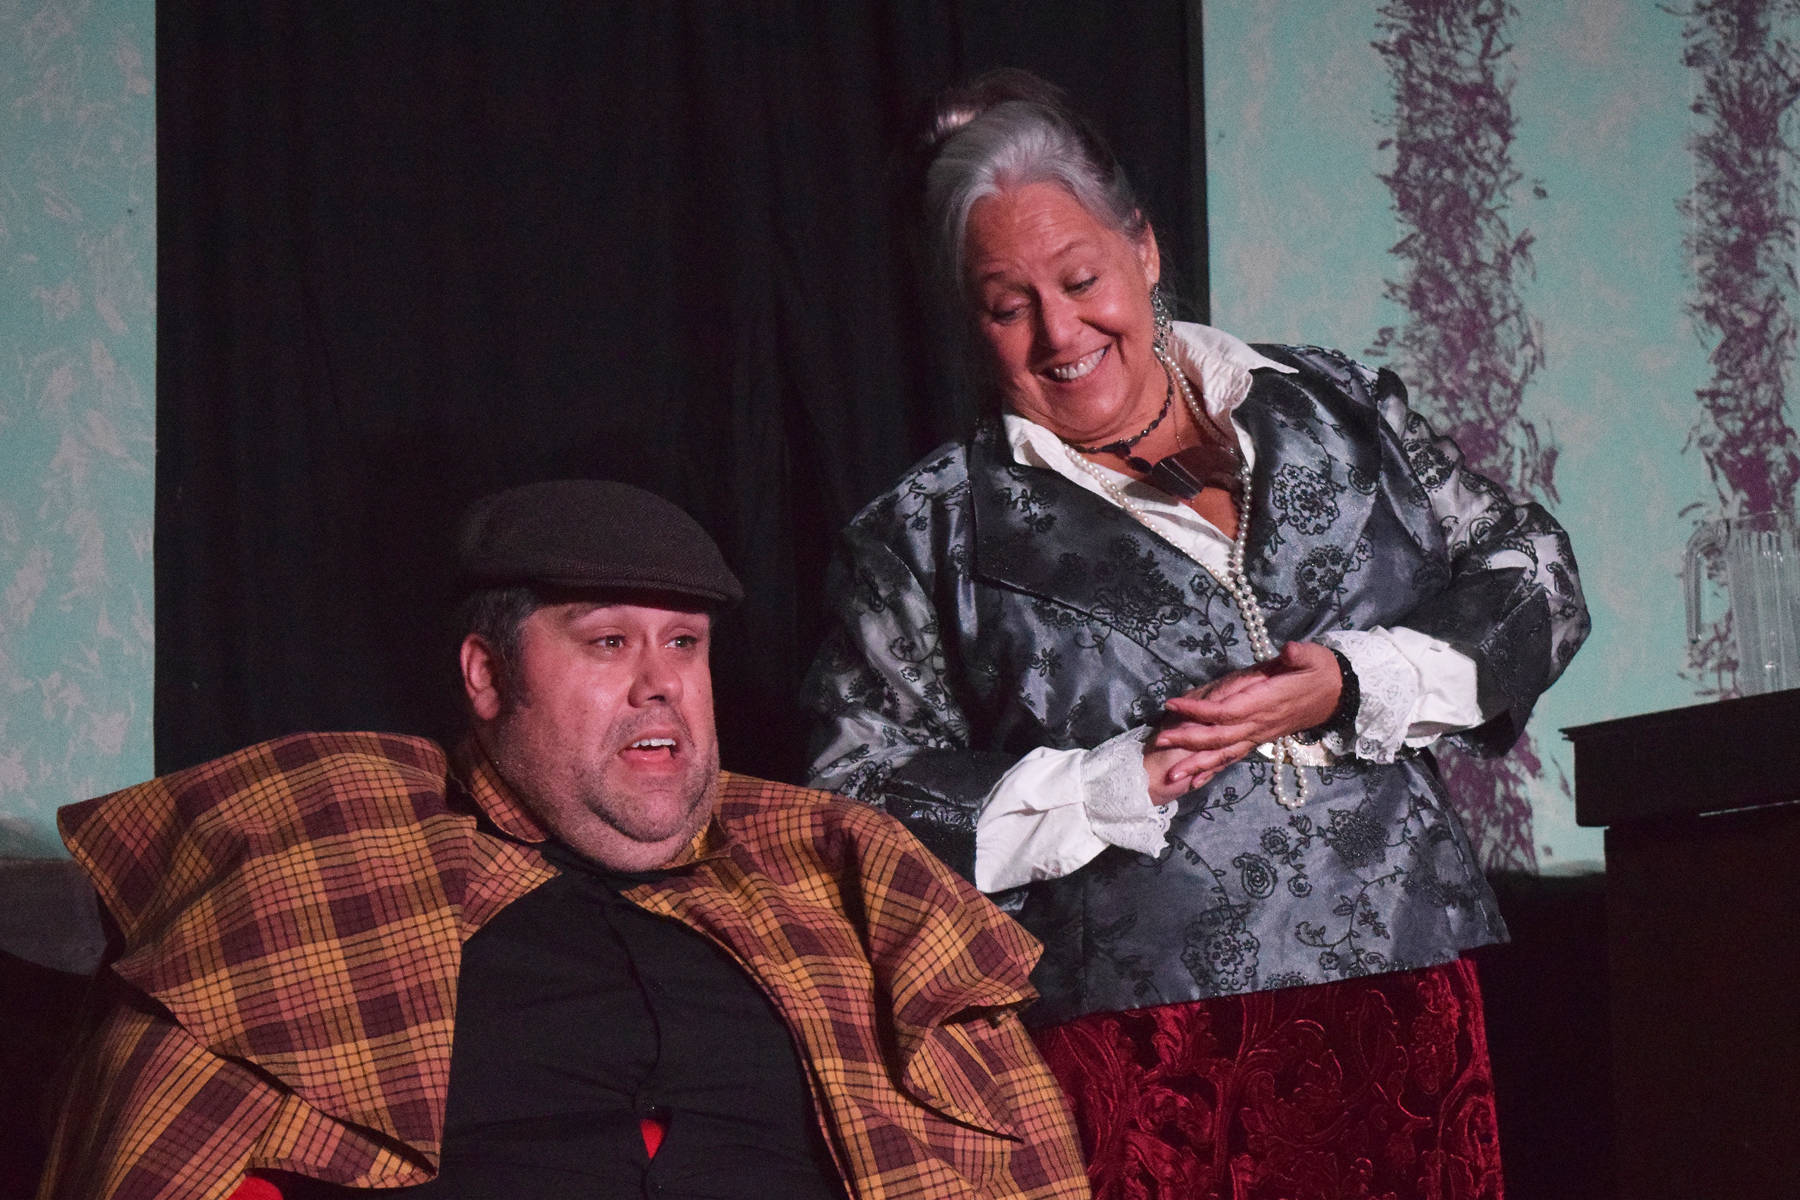 Ian McEwan (left) acts out a scene with Yvette Tappana during a rehearsel for Blazing Guns at Roaring Gulch held Thursday, Aug. 8, 2019, at the Kenai Performer’s stage in Soldotna. (Photo by Joey Klecka/Peninsula Clarion)